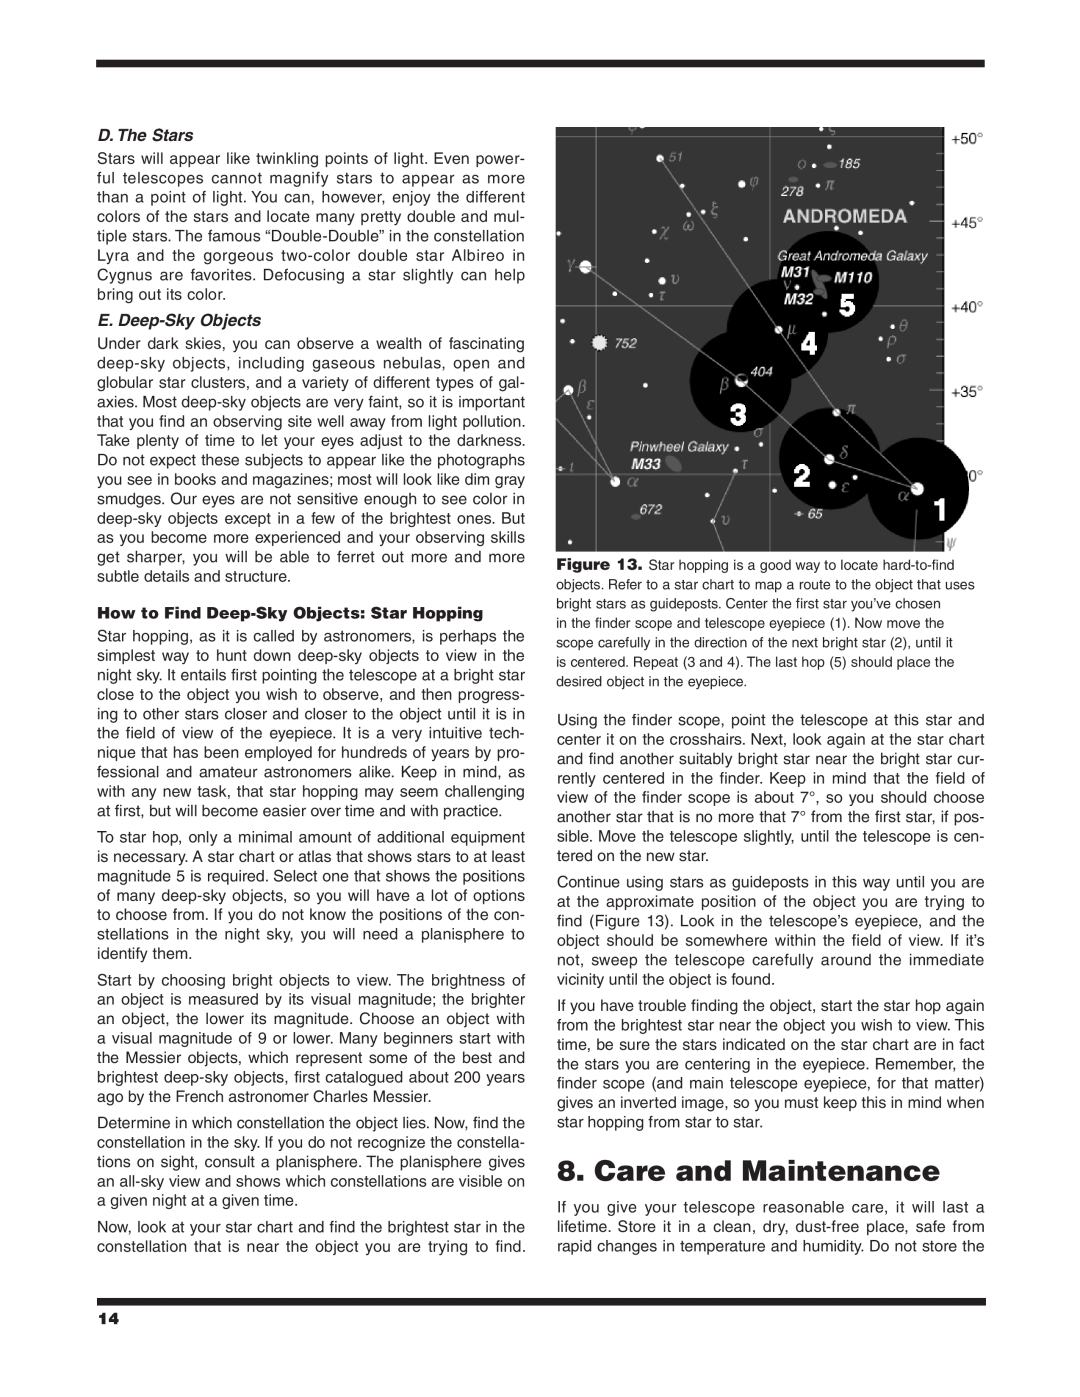 Orion 130ST EQ Care and Maintenance, D. The Stars, E. Deep-Sky Objects, How to Find Deep-Sky Objects Star Hopping 